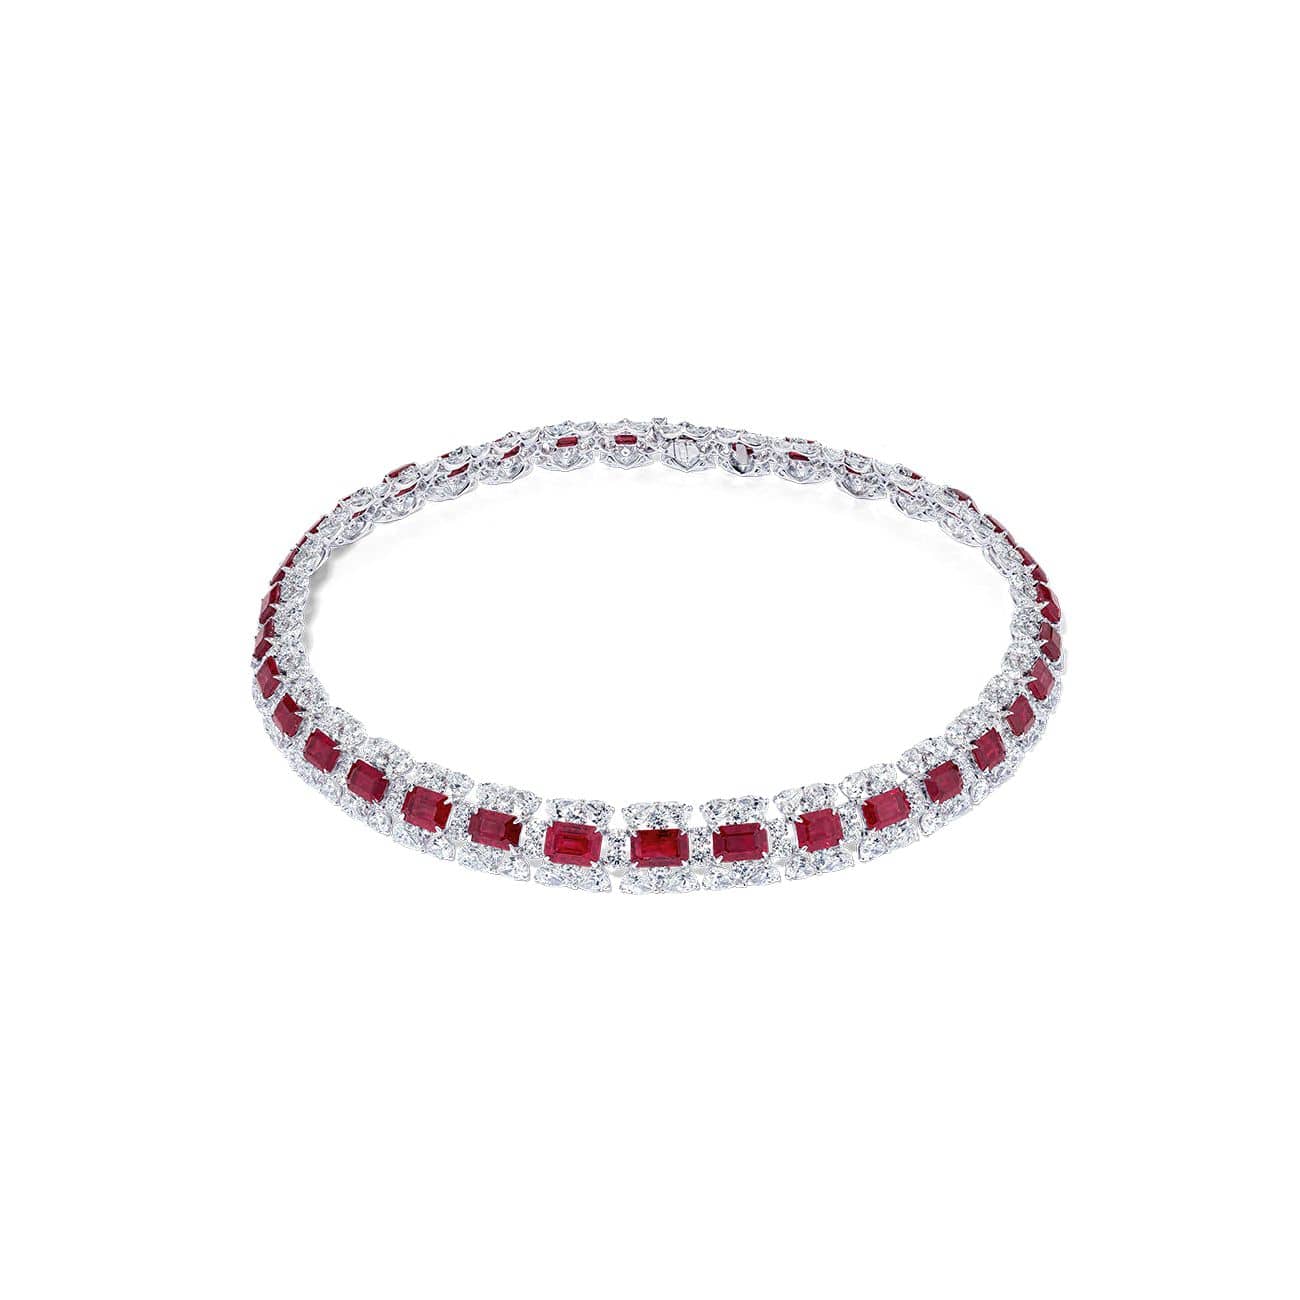 Romancing Rubies: Jaw-Dropping Jewels Featuring July's Birthstone